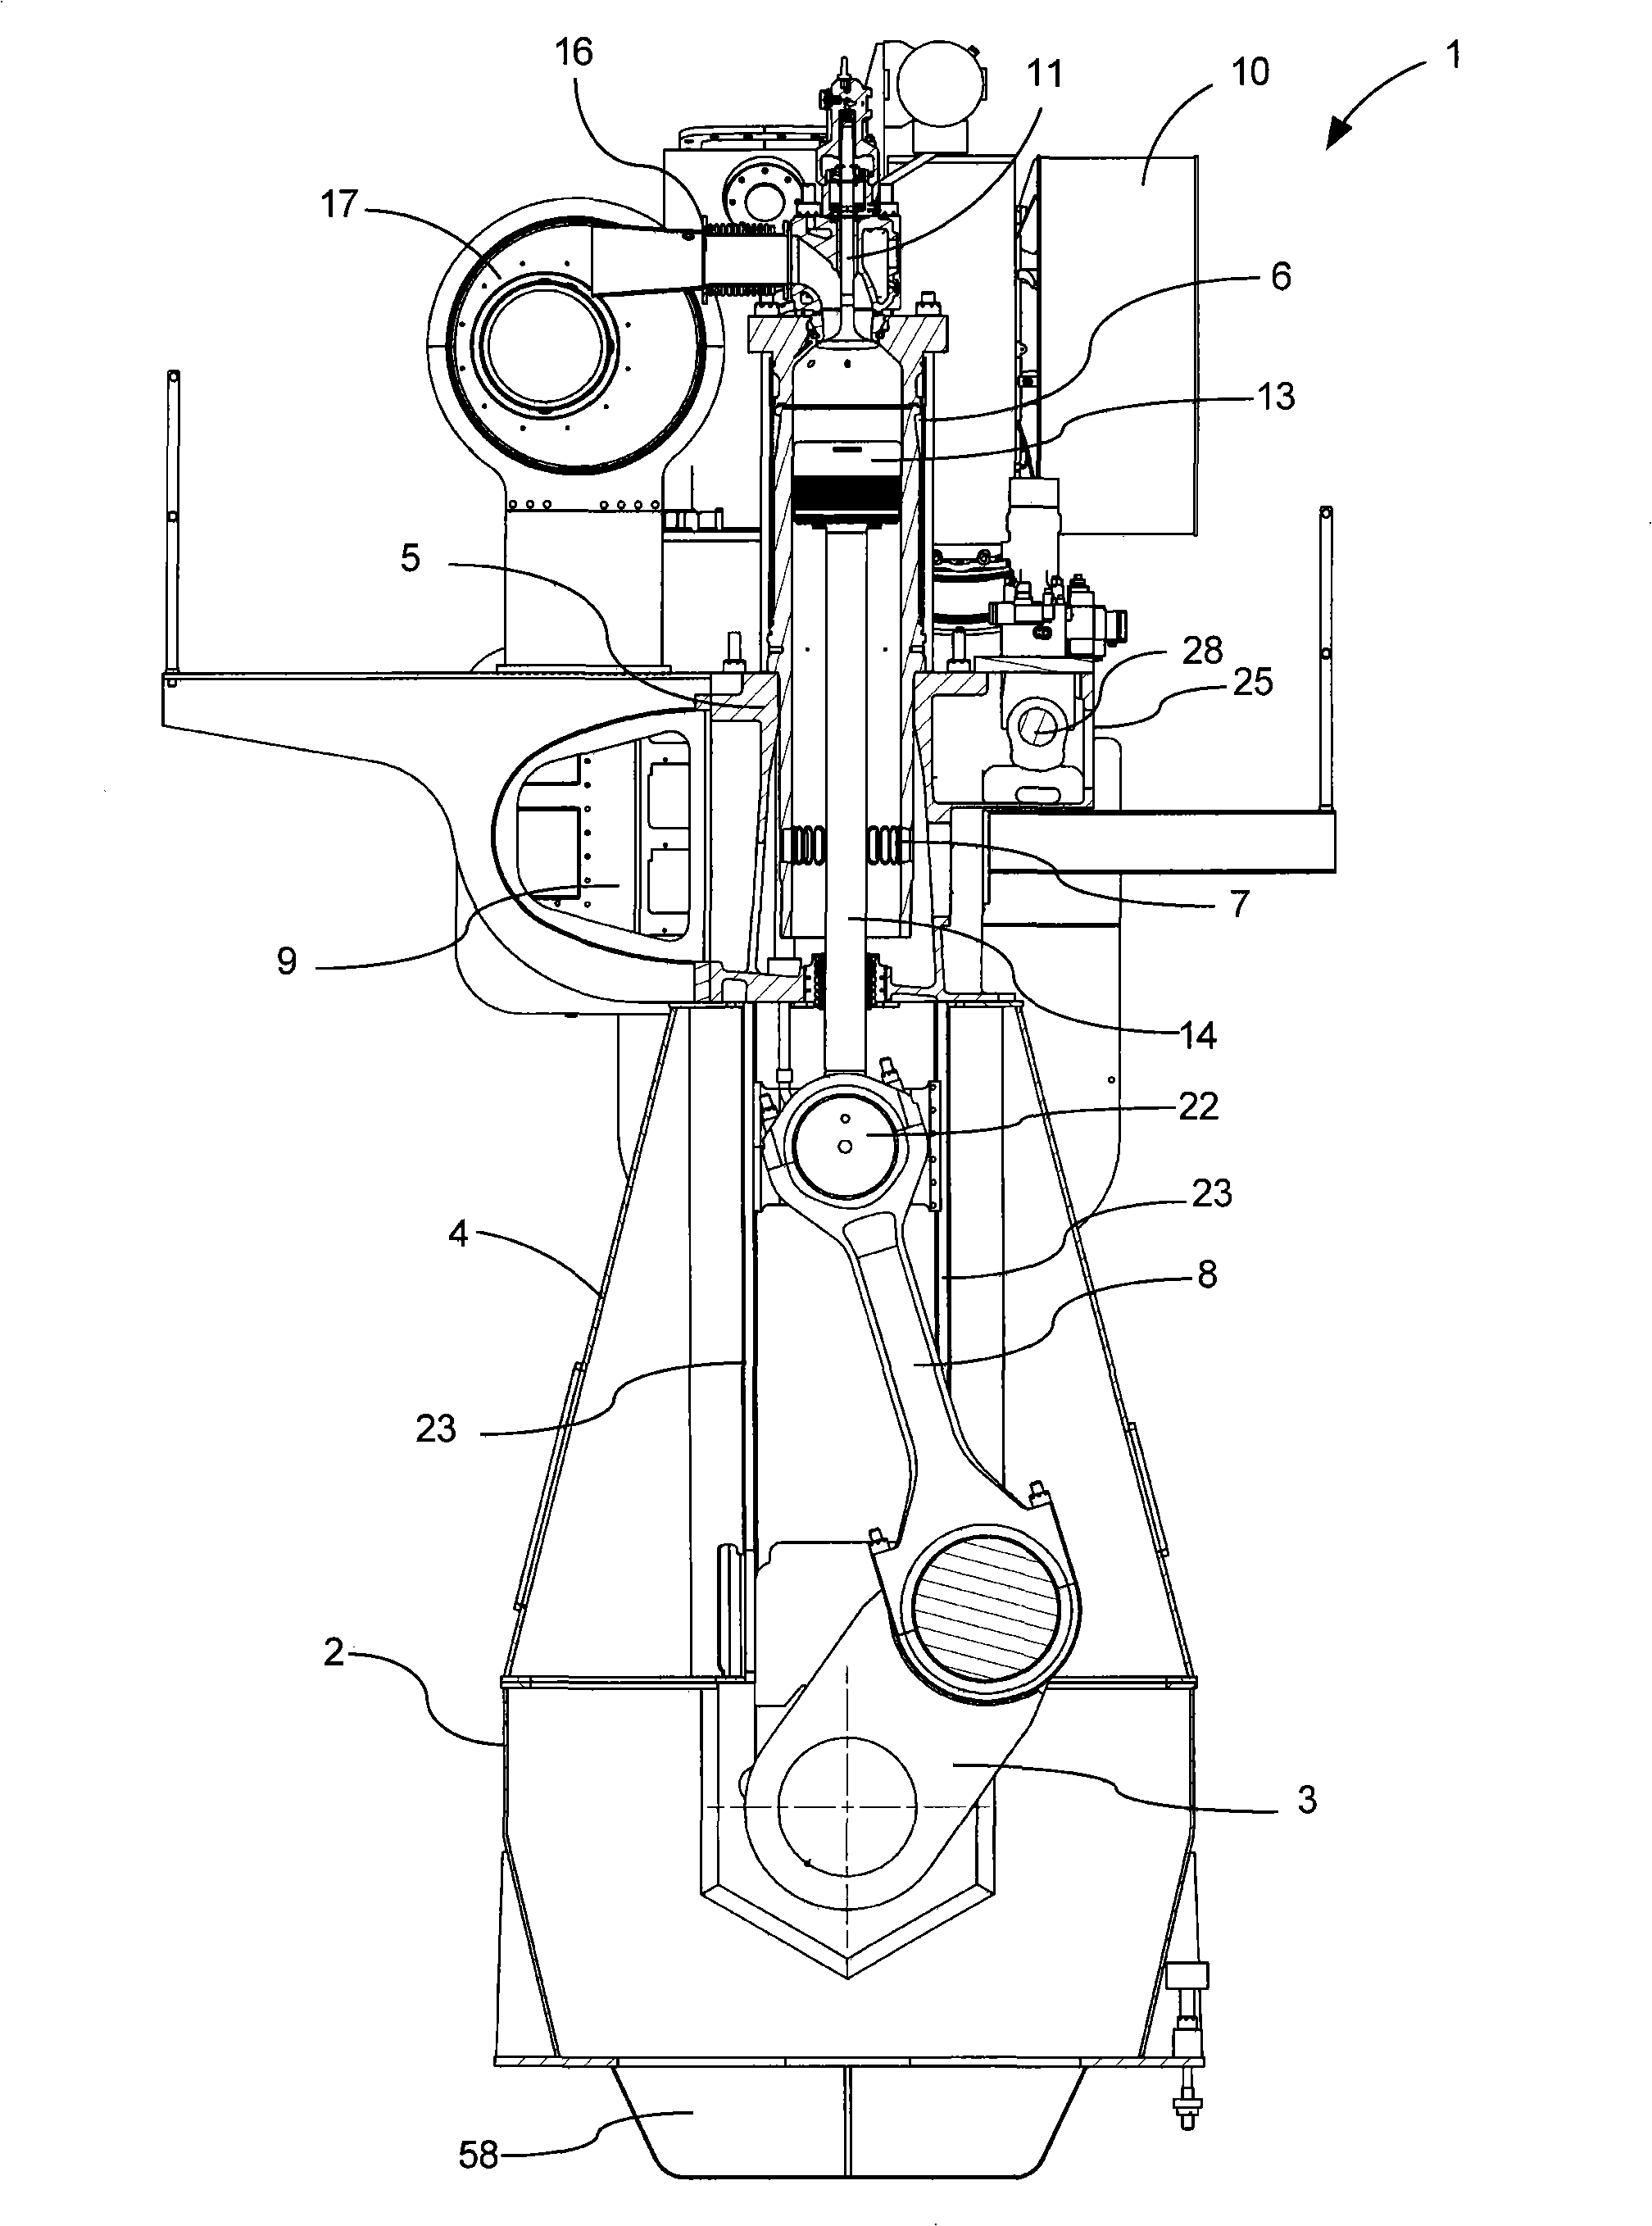 Cam driven exhaust valve actuating system for large two-stroke diesel engine